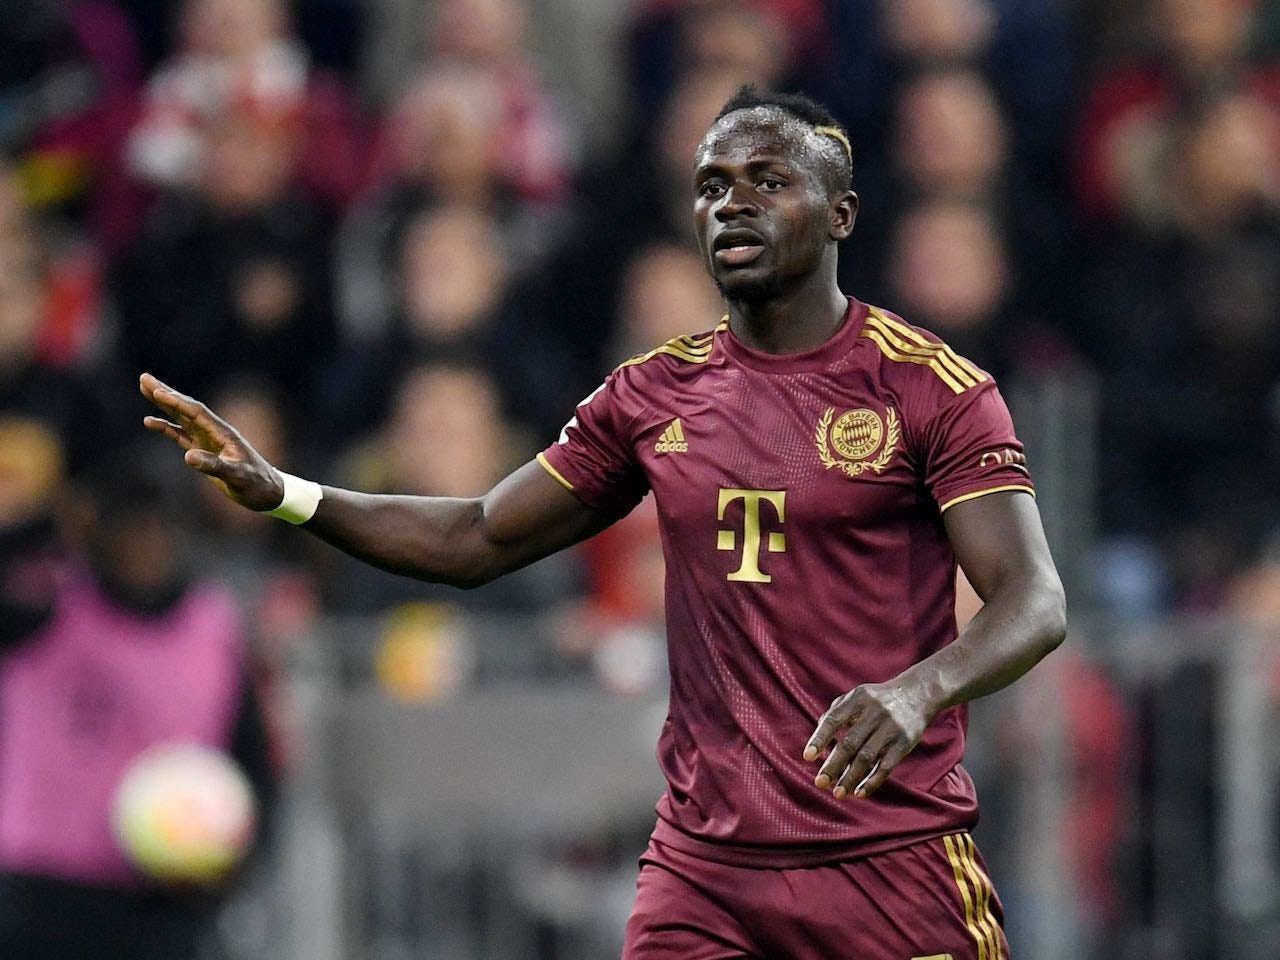 Bayern Munich's Sadio Mane 'facing three months out after surgery, doubt for Champions League tie'